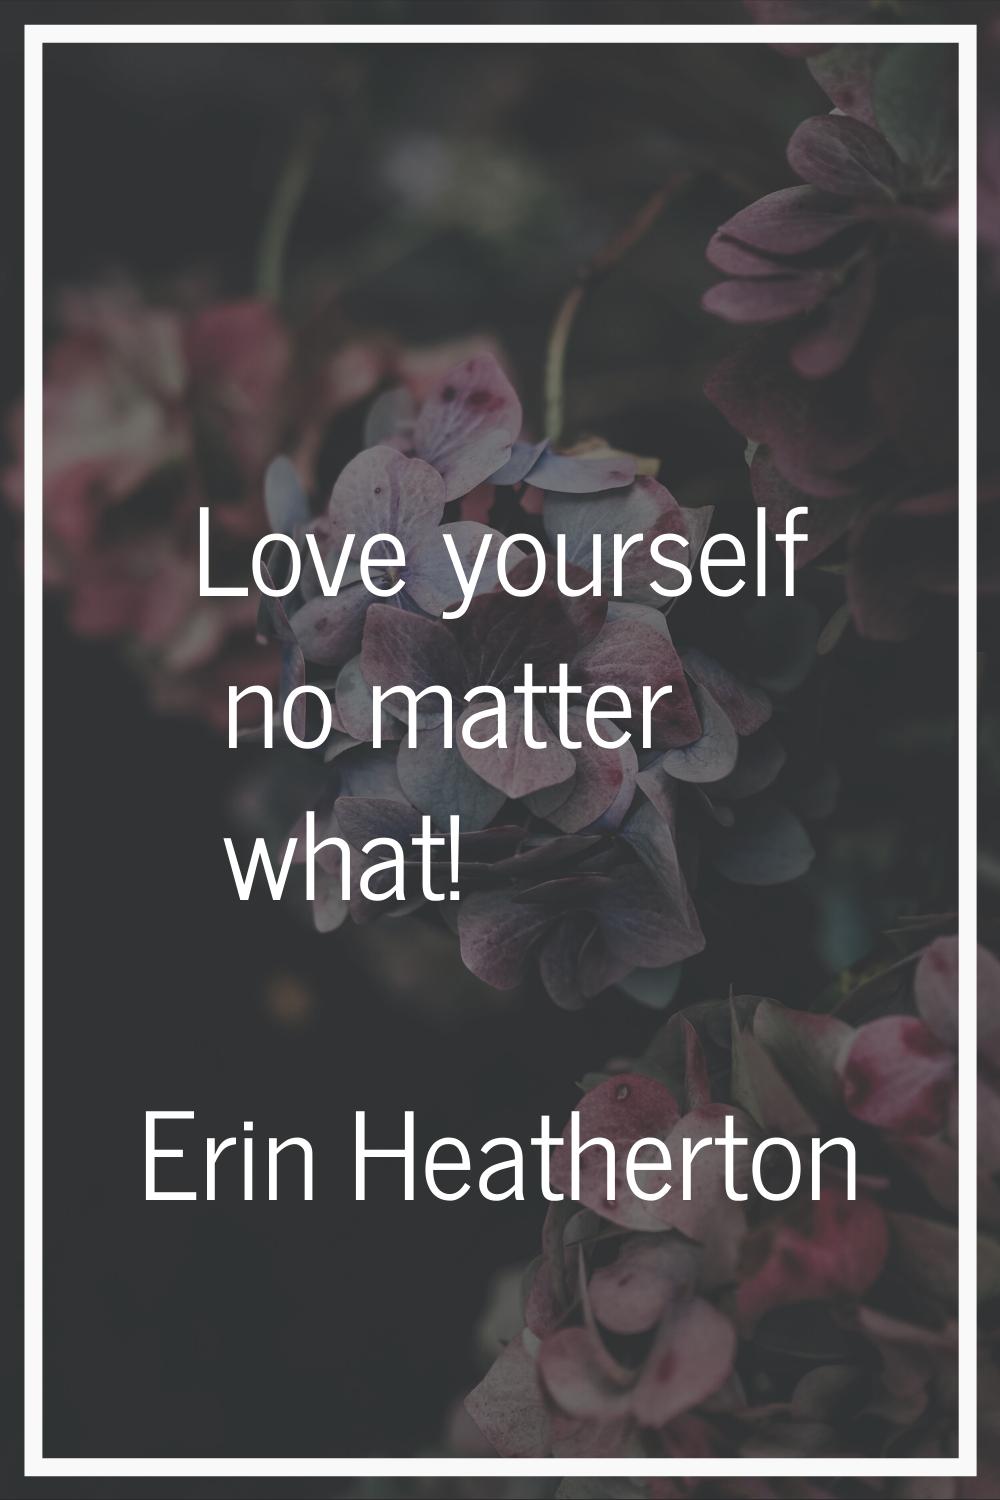 Love yourself no matter what!